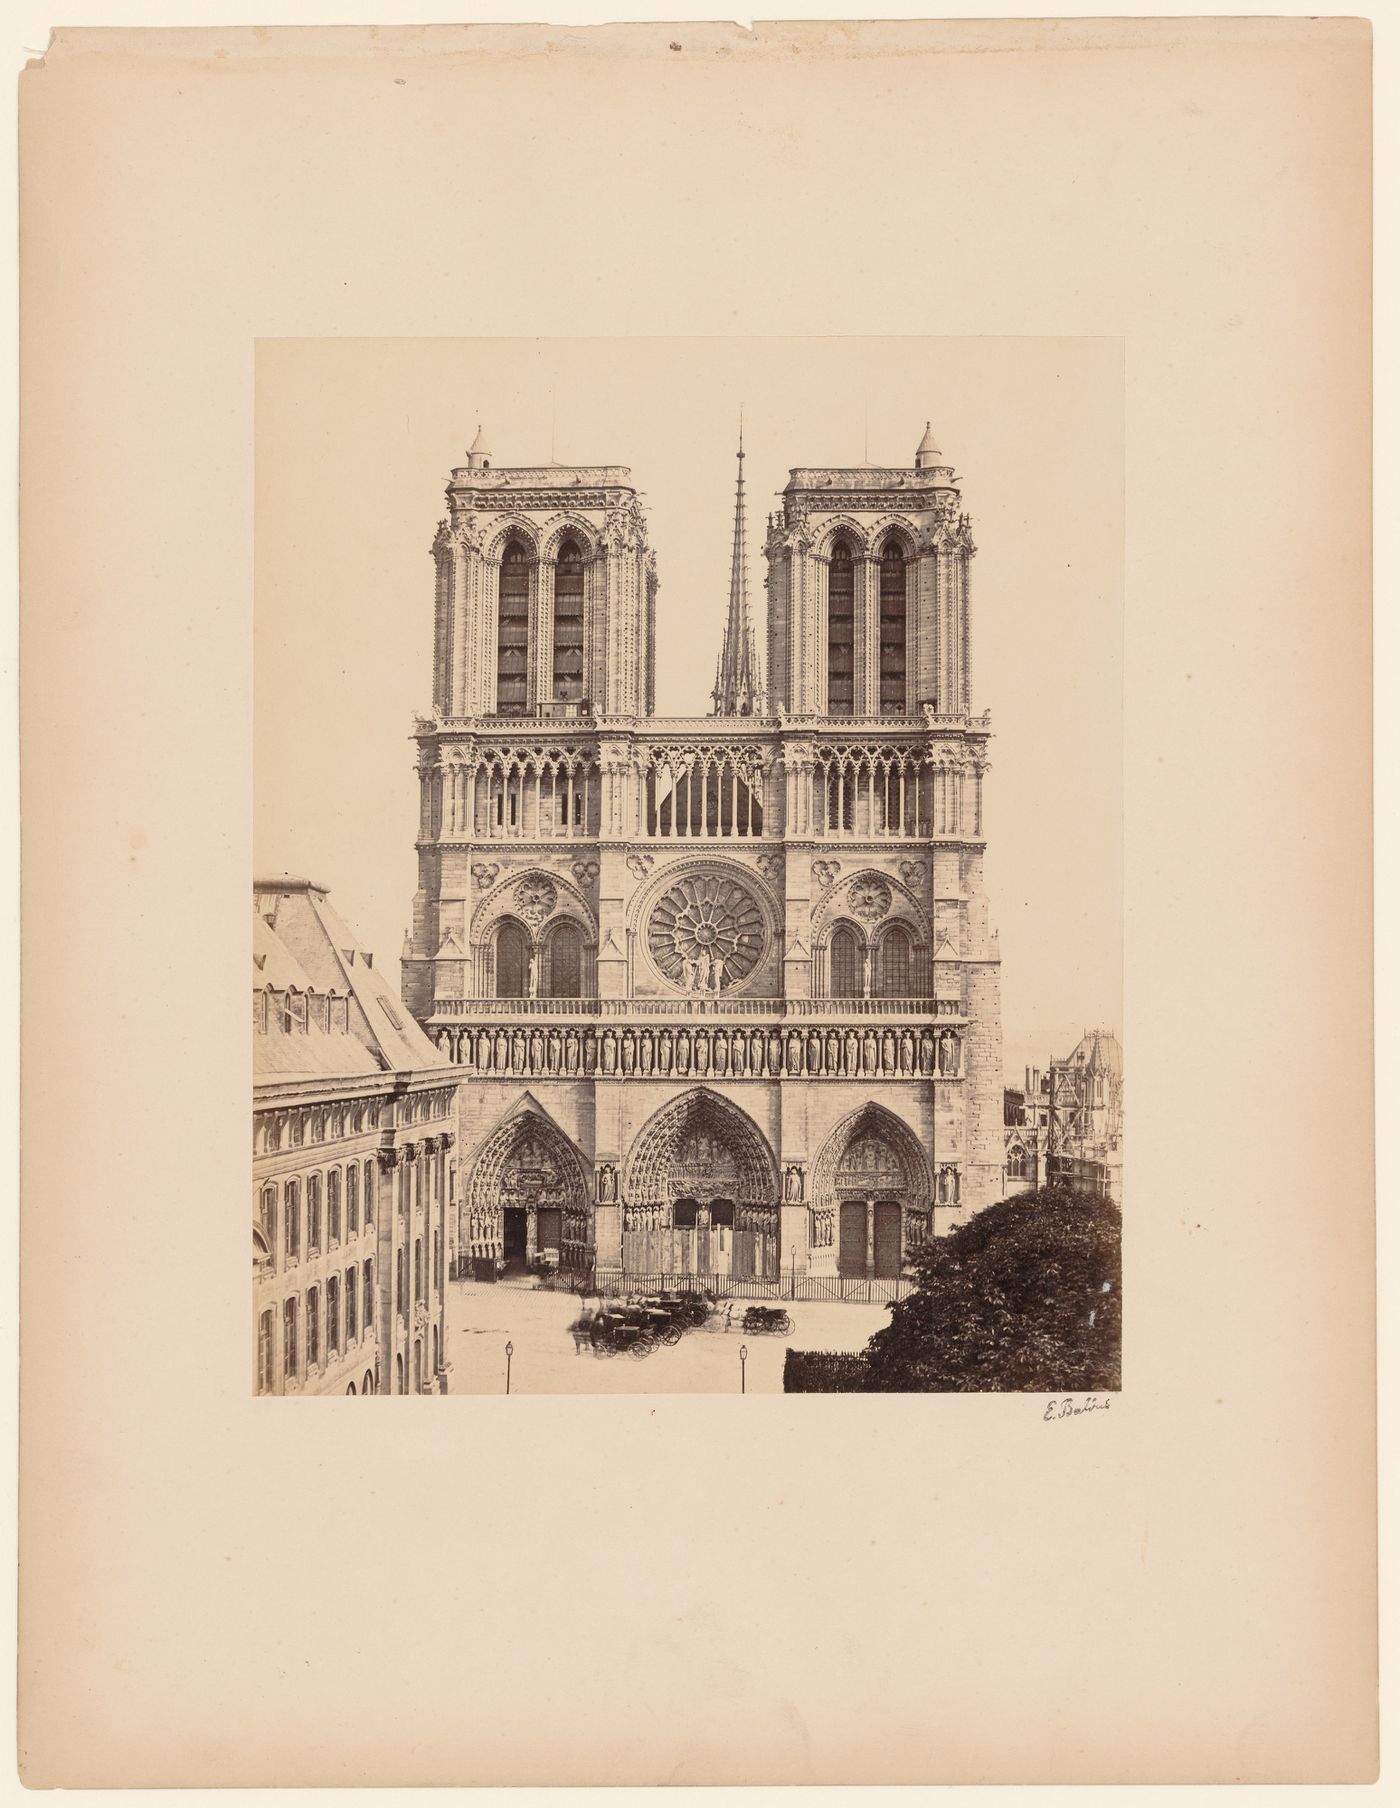 Exterior view of façade and towers (including crossing spire) of Notre-Dame, Paris, France